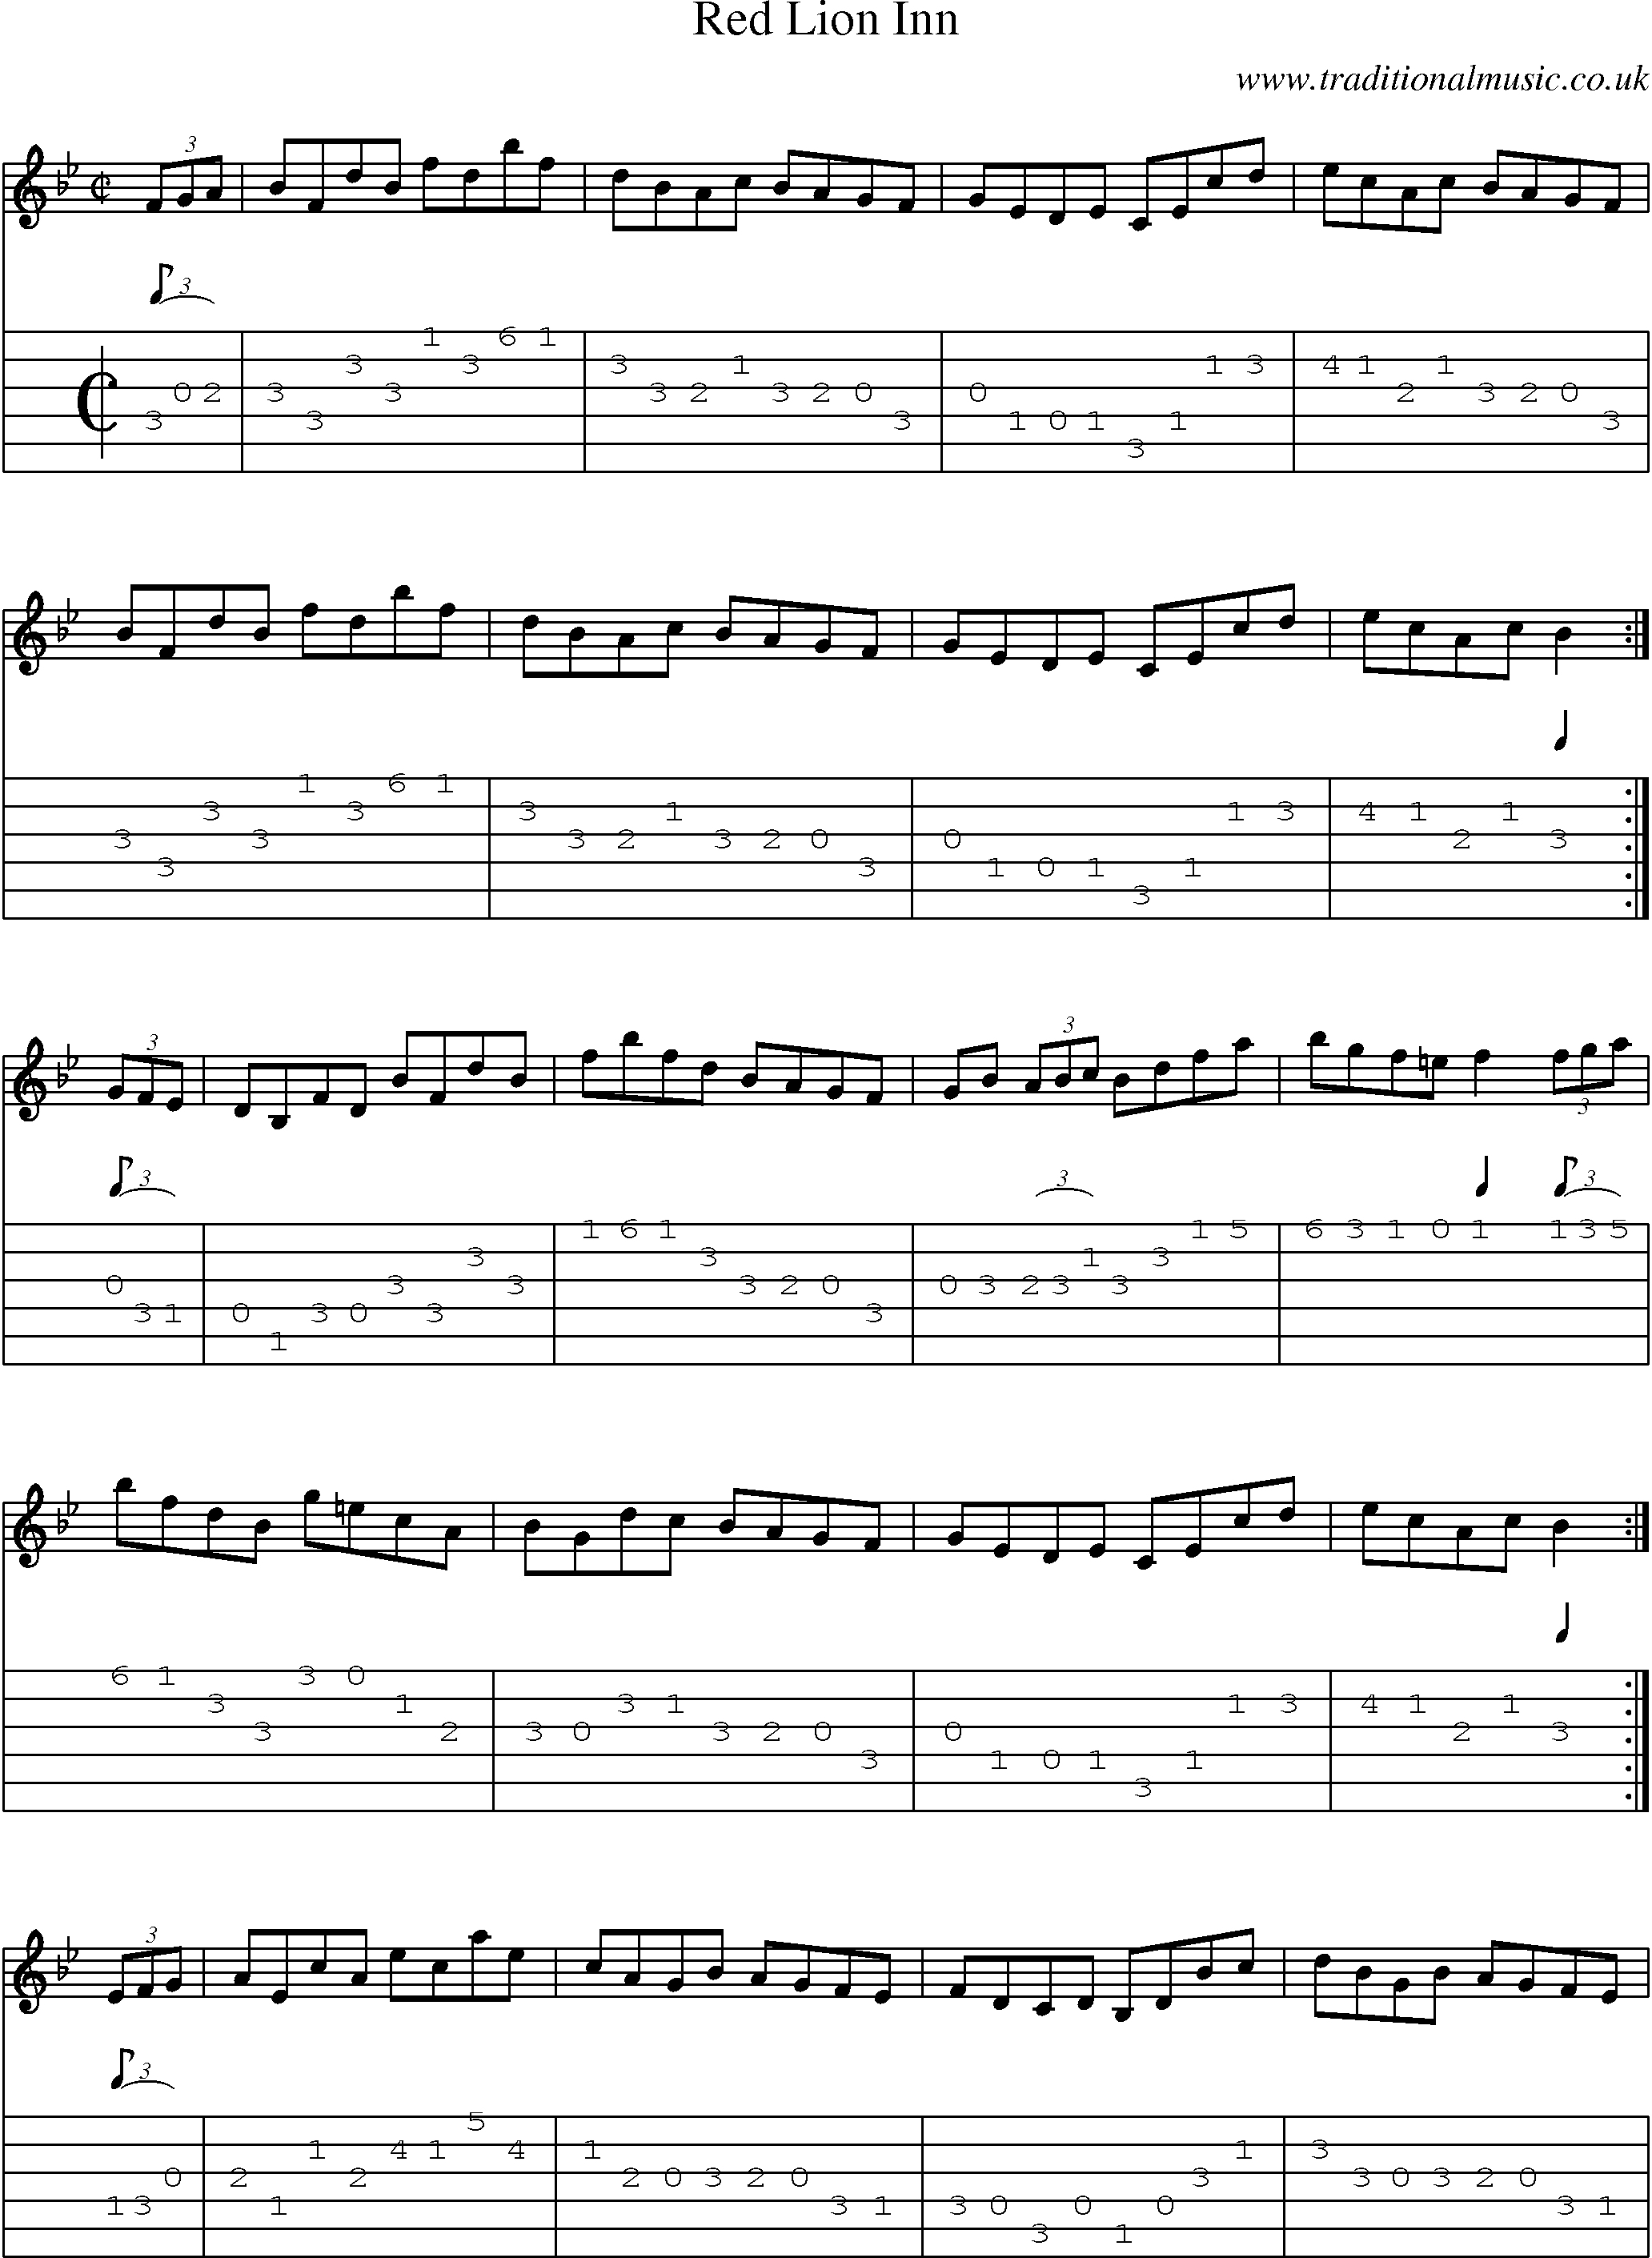 Music Score and Guitar Tabs for Red Lion Inn